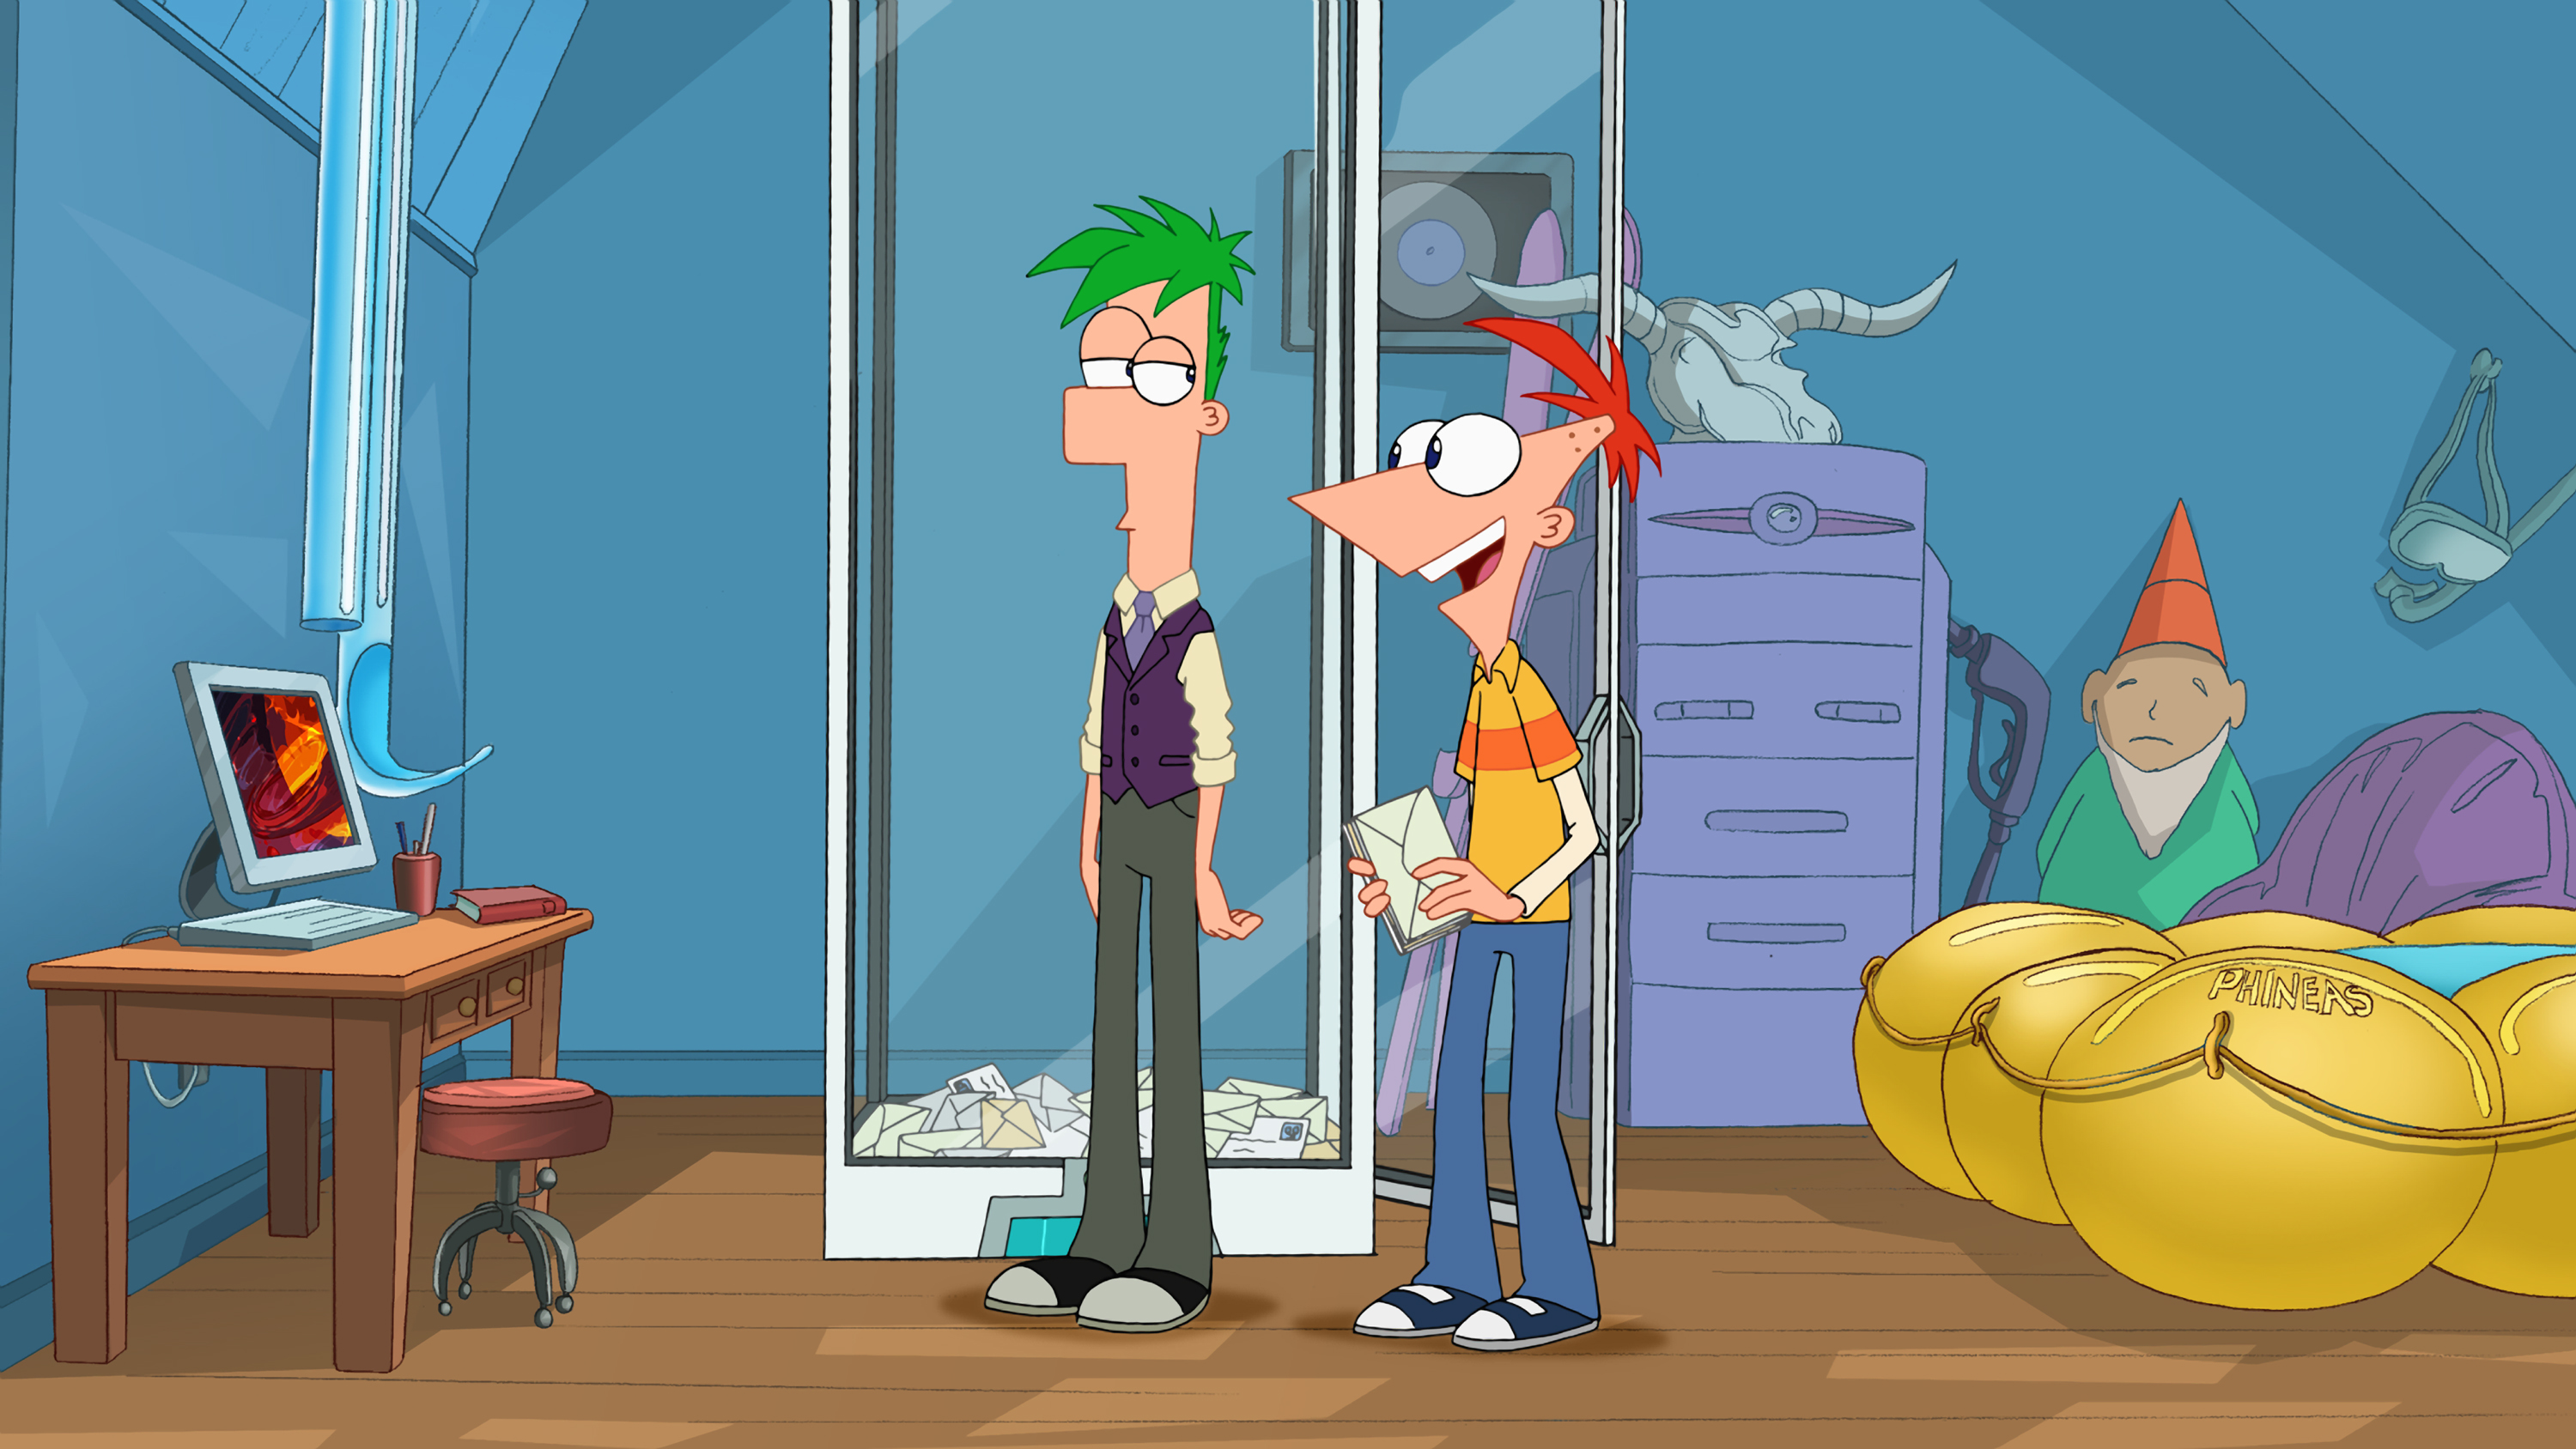 Phineas and ferb act your age full episode